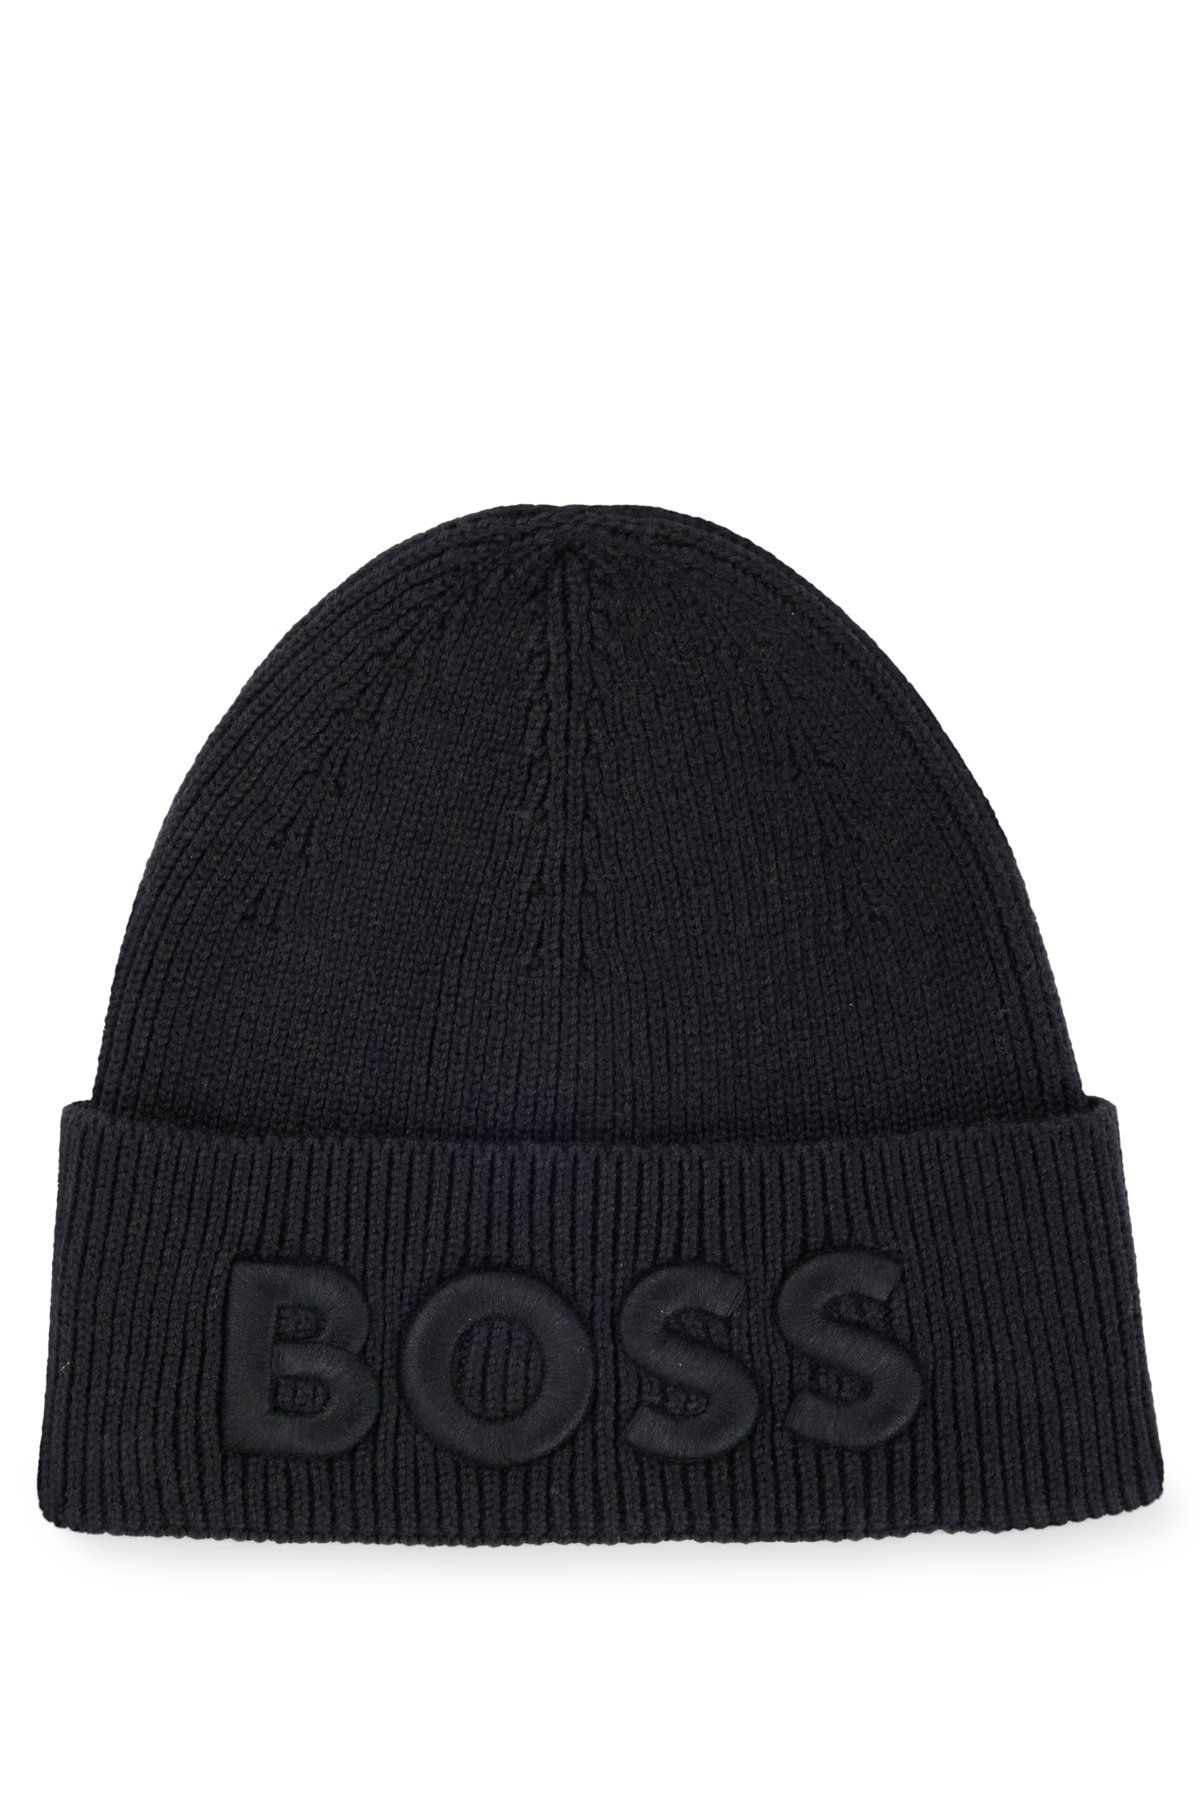 - Logo-embroidered and wool cotton BOSS hat in beanie